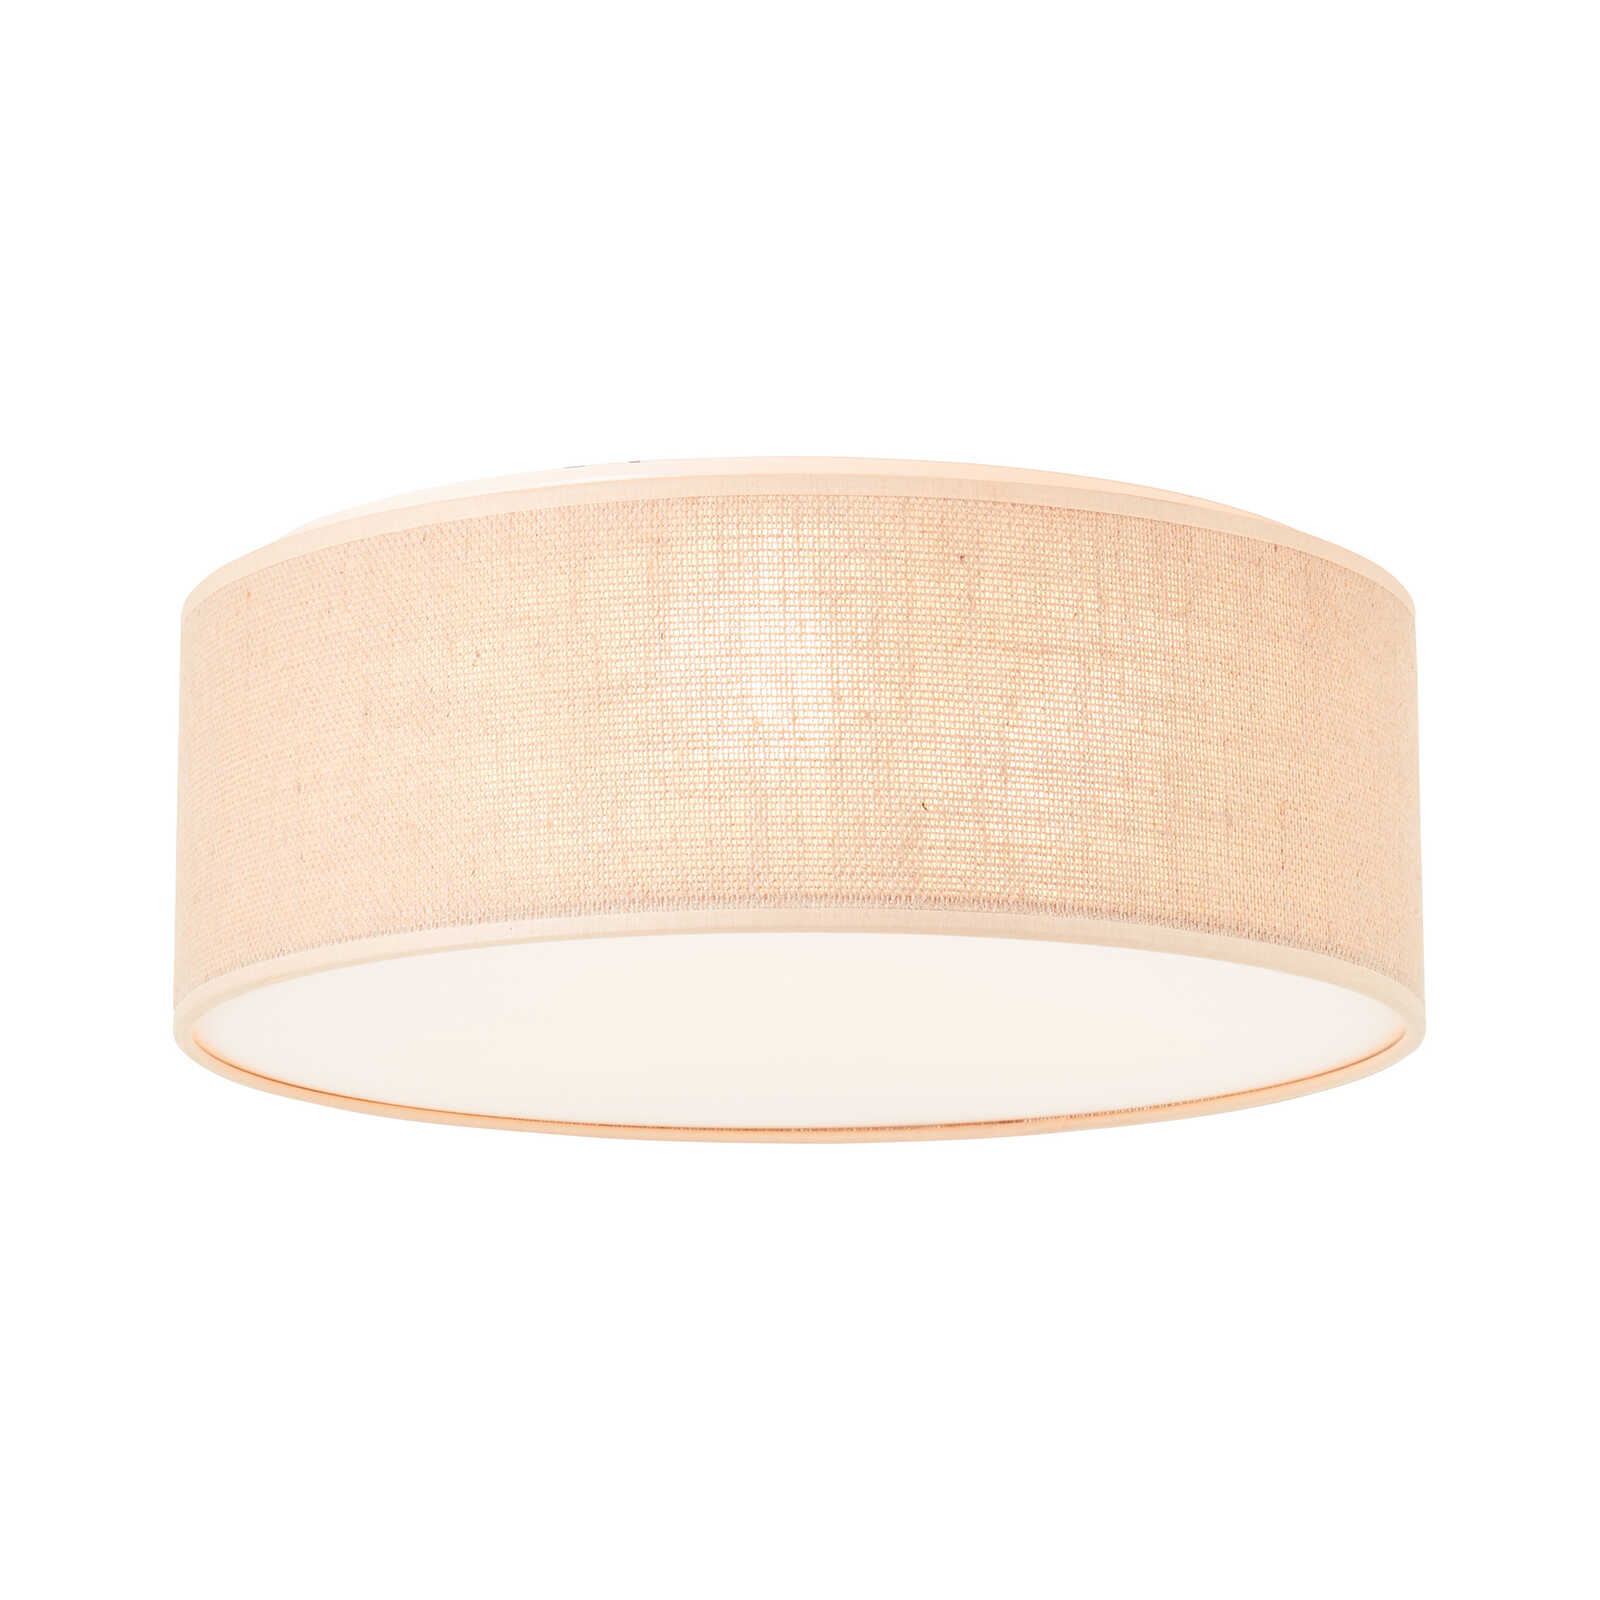 Textile ceiling light - Alicia 3 - Brown
